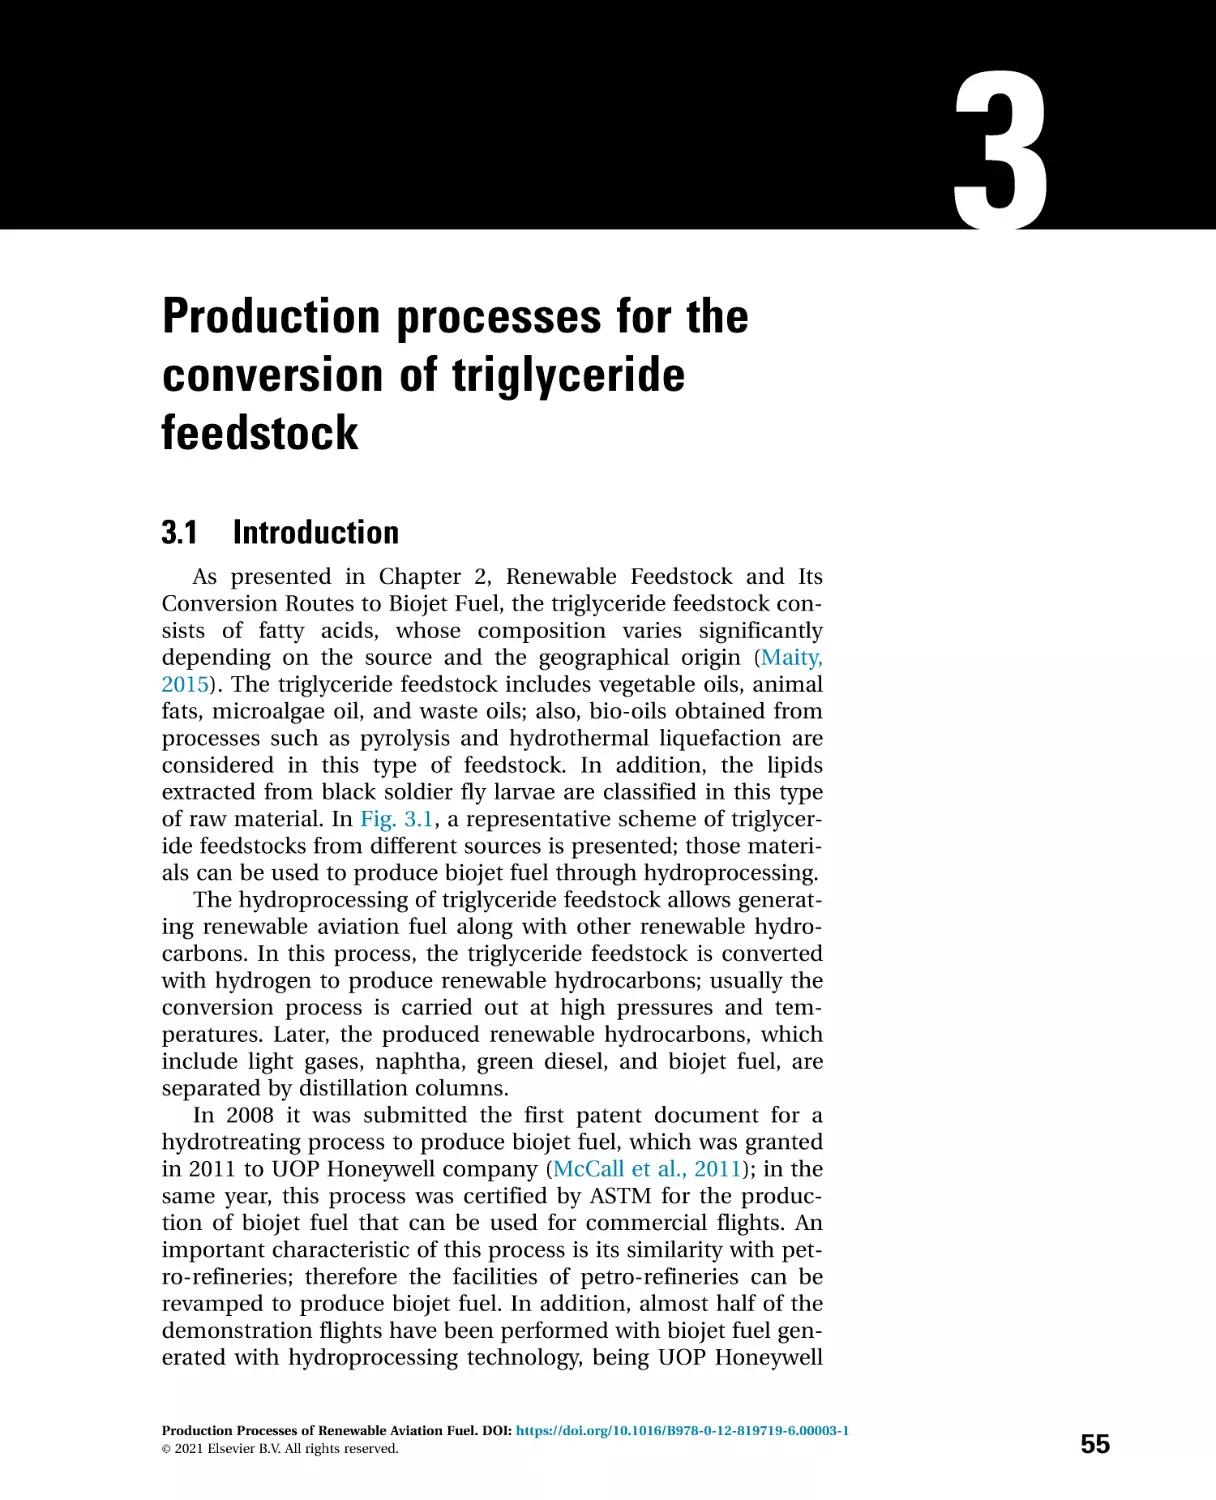 3---Production-processes-for-the-conversio_2021_Production-Processes-of-Rene
3 Production processes for the conversion of triglyceride feedstock
3.1 Introduction